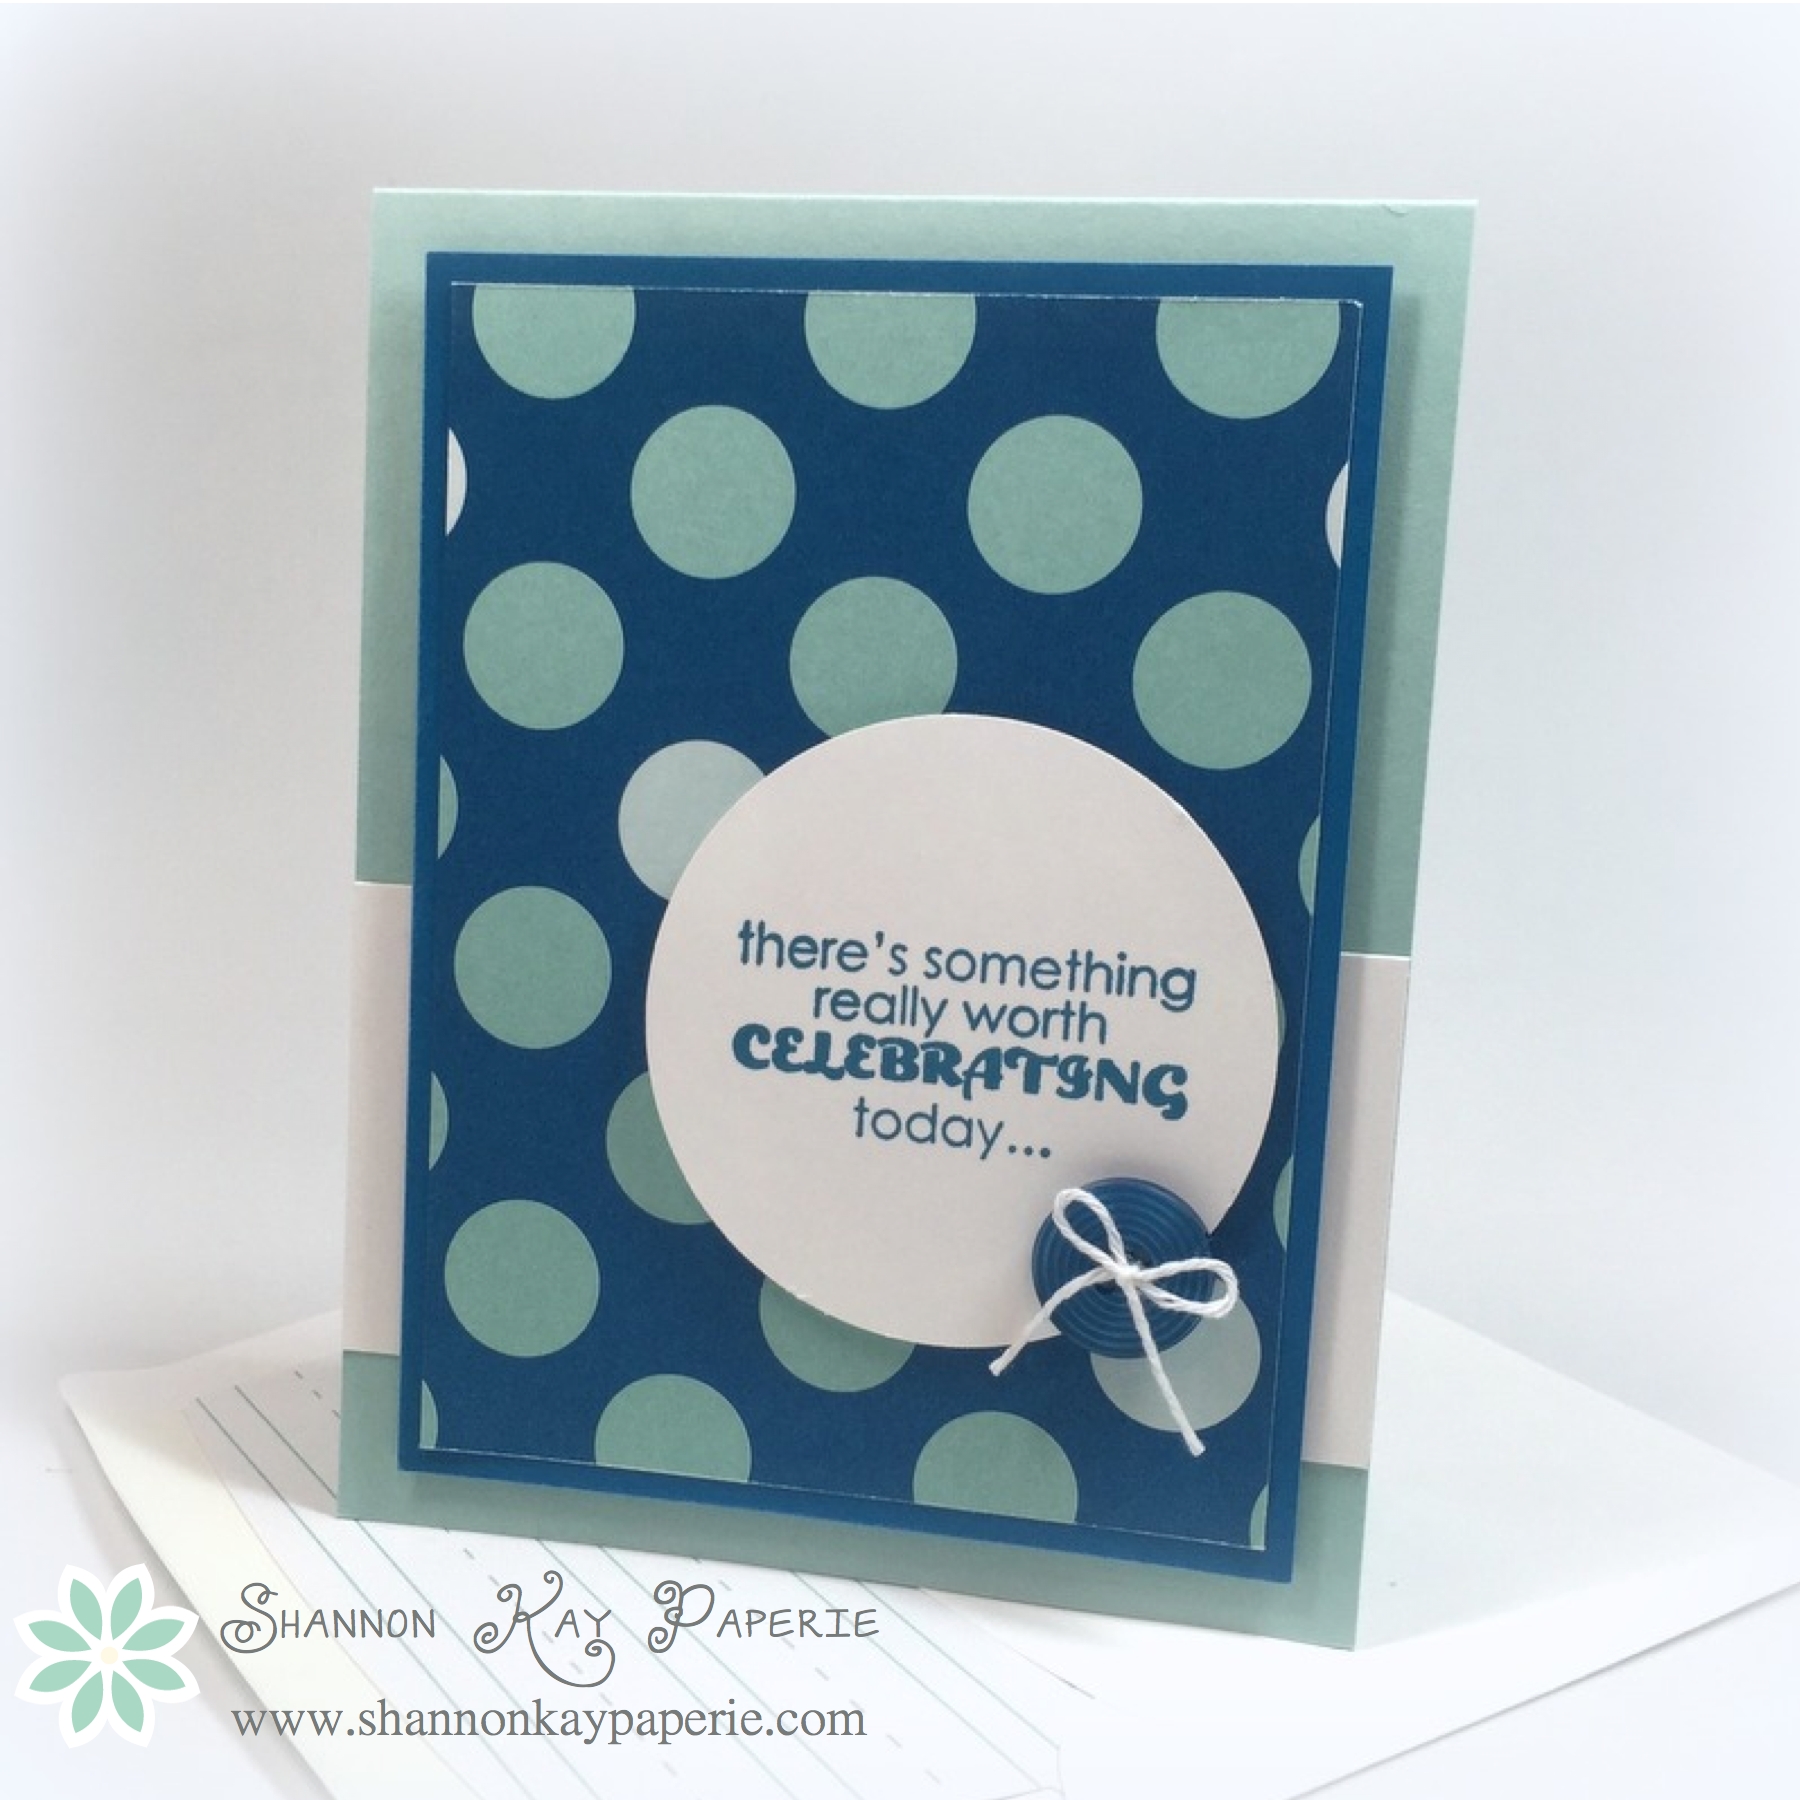 Celebrating You! - 30 Day Card Challenge, Day 1 - Shannon Kay Paperie